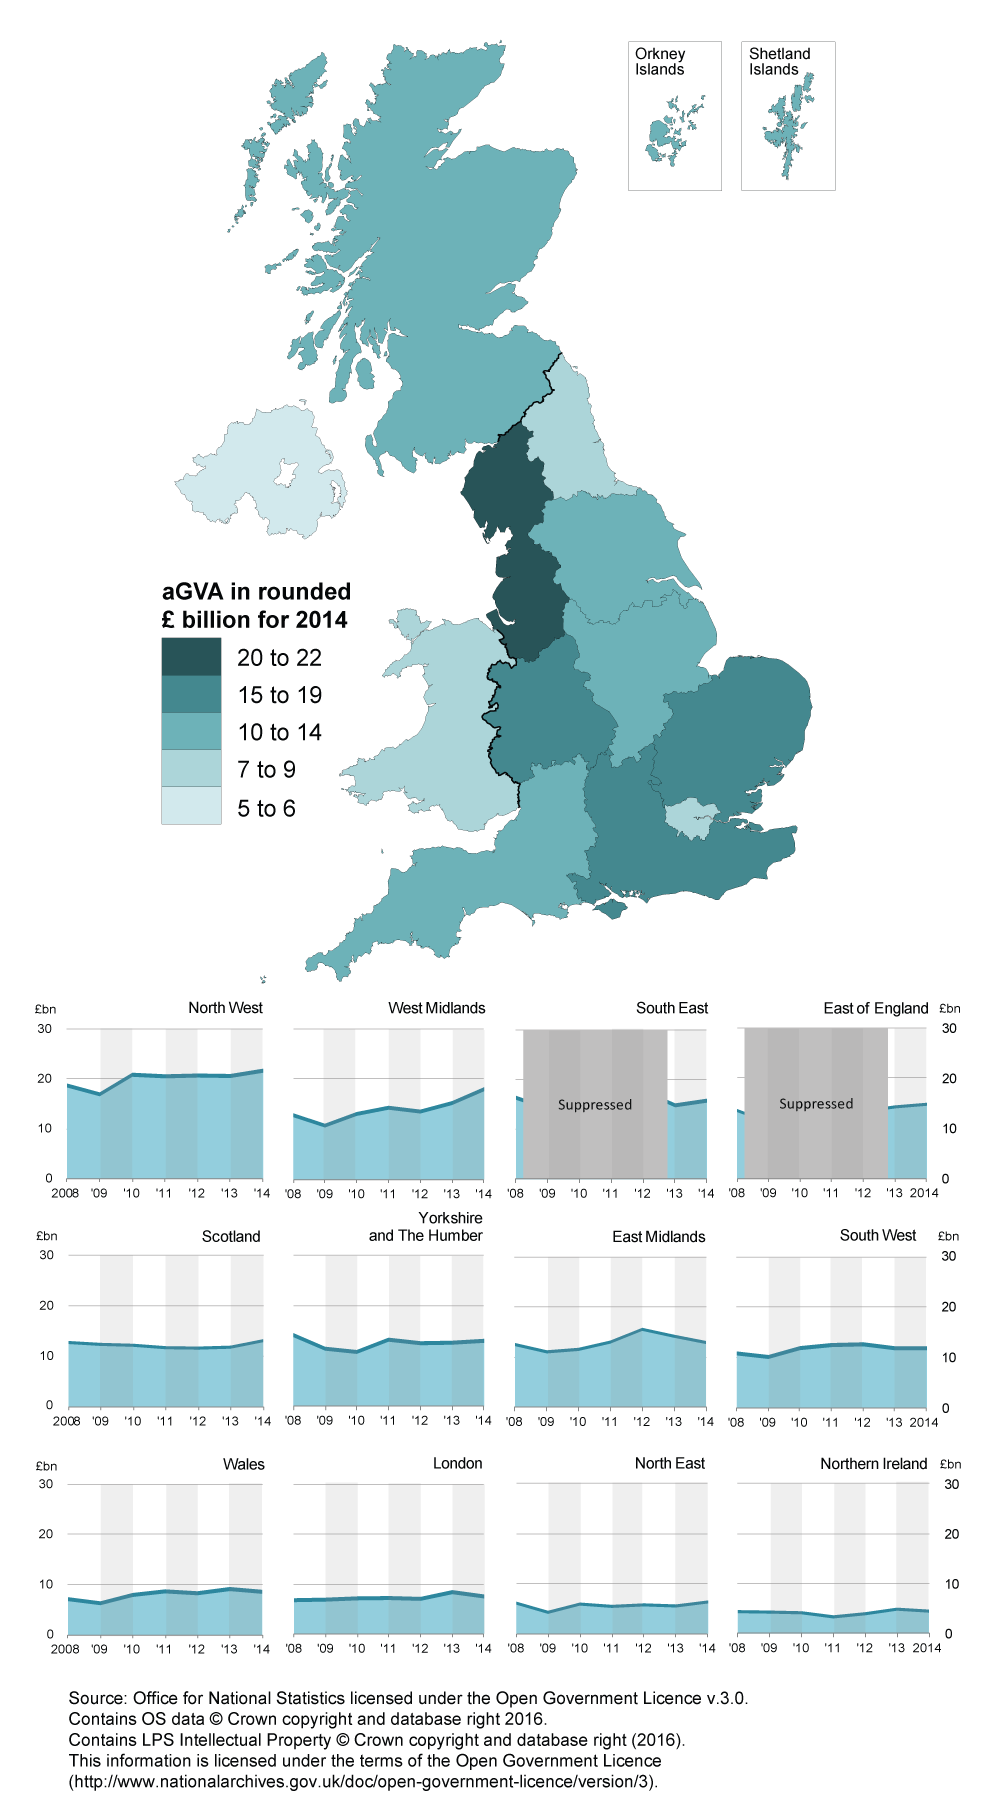 The North West and the West Midlands contribute over a quarter of Manufacturing aGVA in 2014.